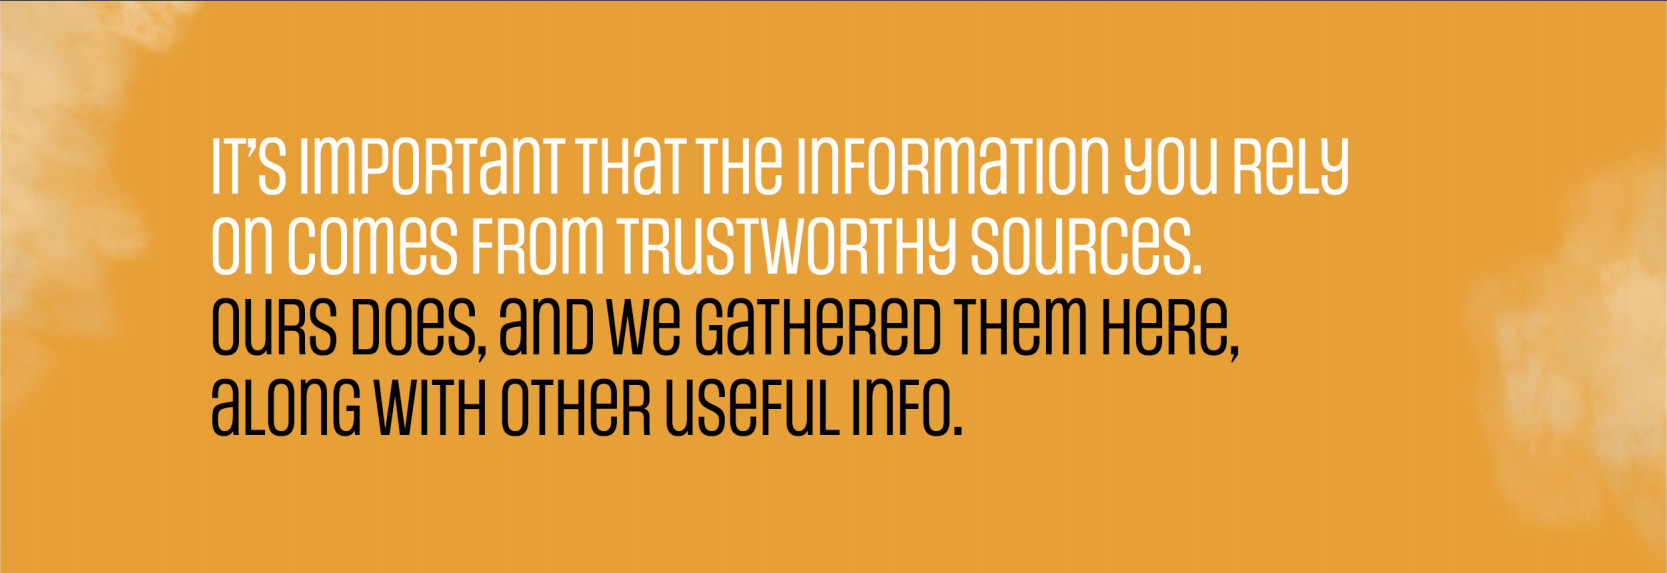 It's important that the information you rely on comes from trustworthy sources. ours does, and we gathered them here, along with other useful info.